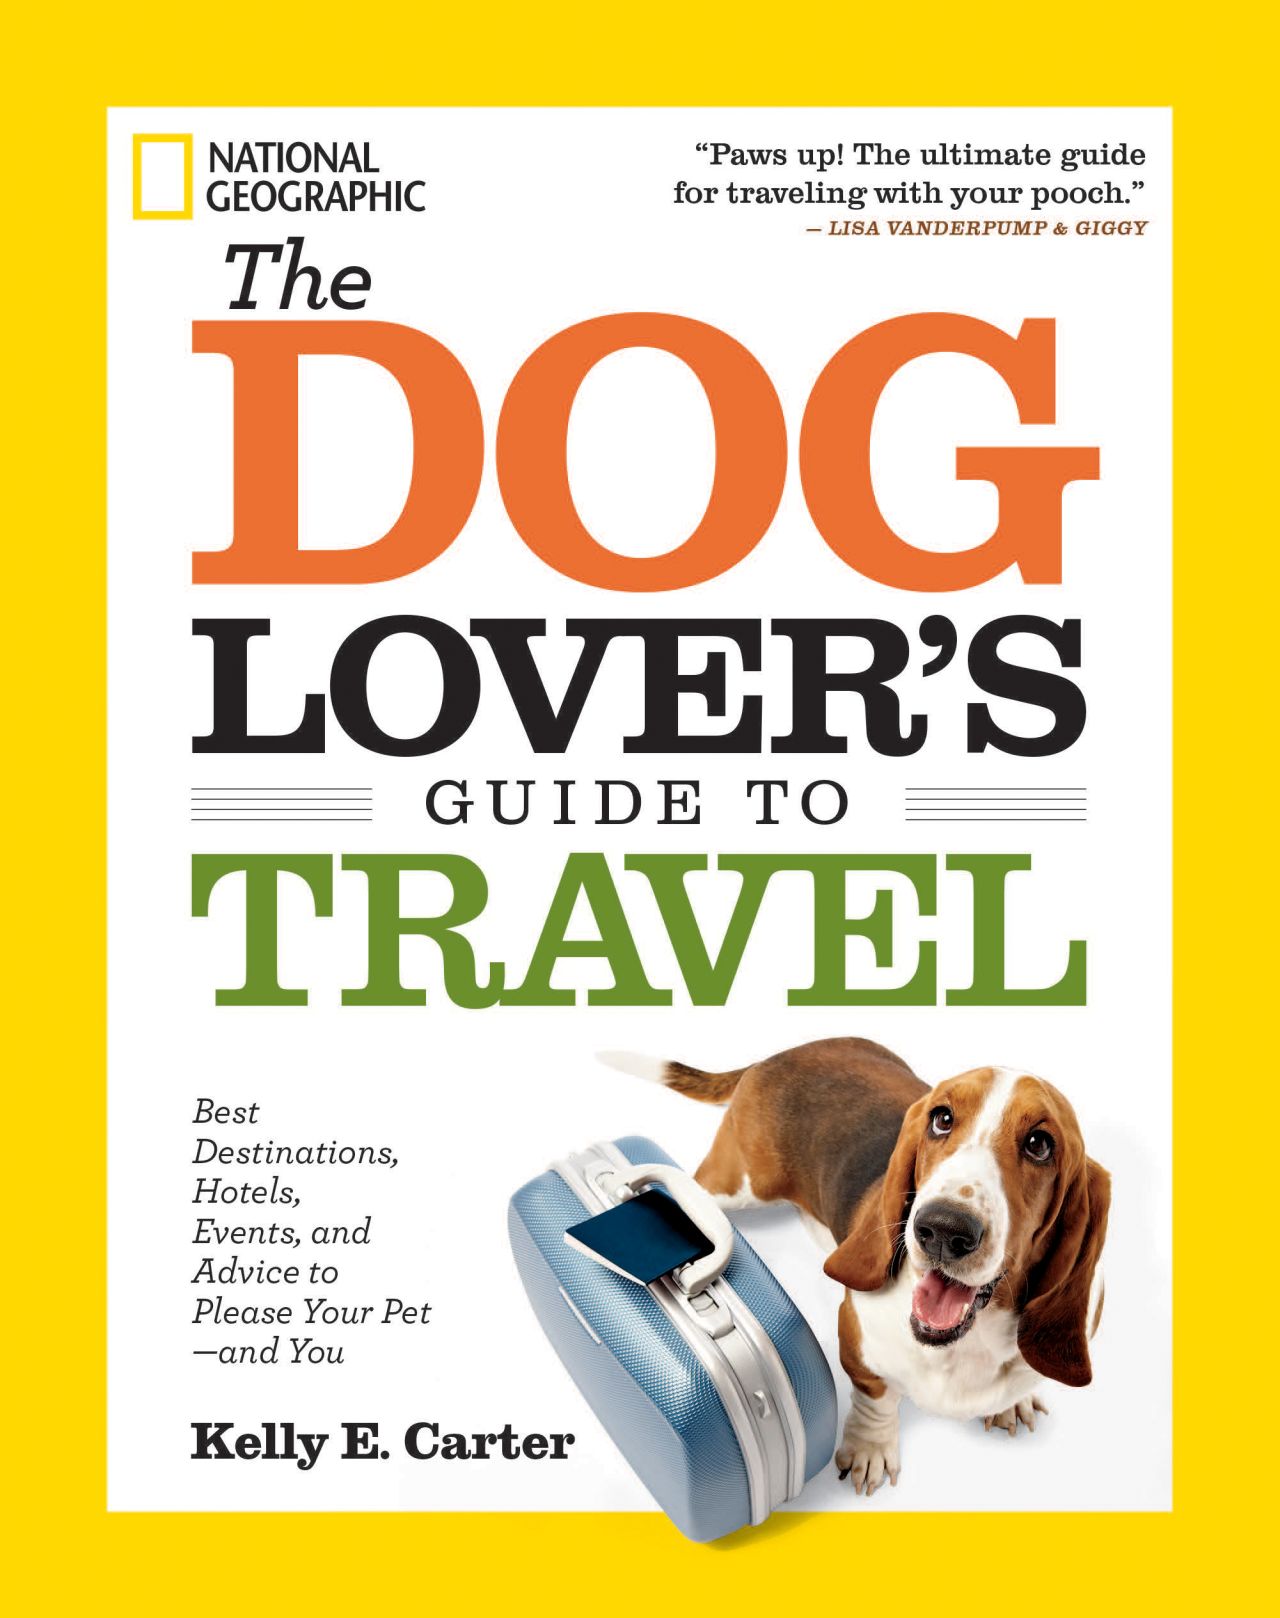 Did you know your pooch should wear sunscreen at the beach? "The Dog Lover's Guide to Travel" covers everything about canine travel.